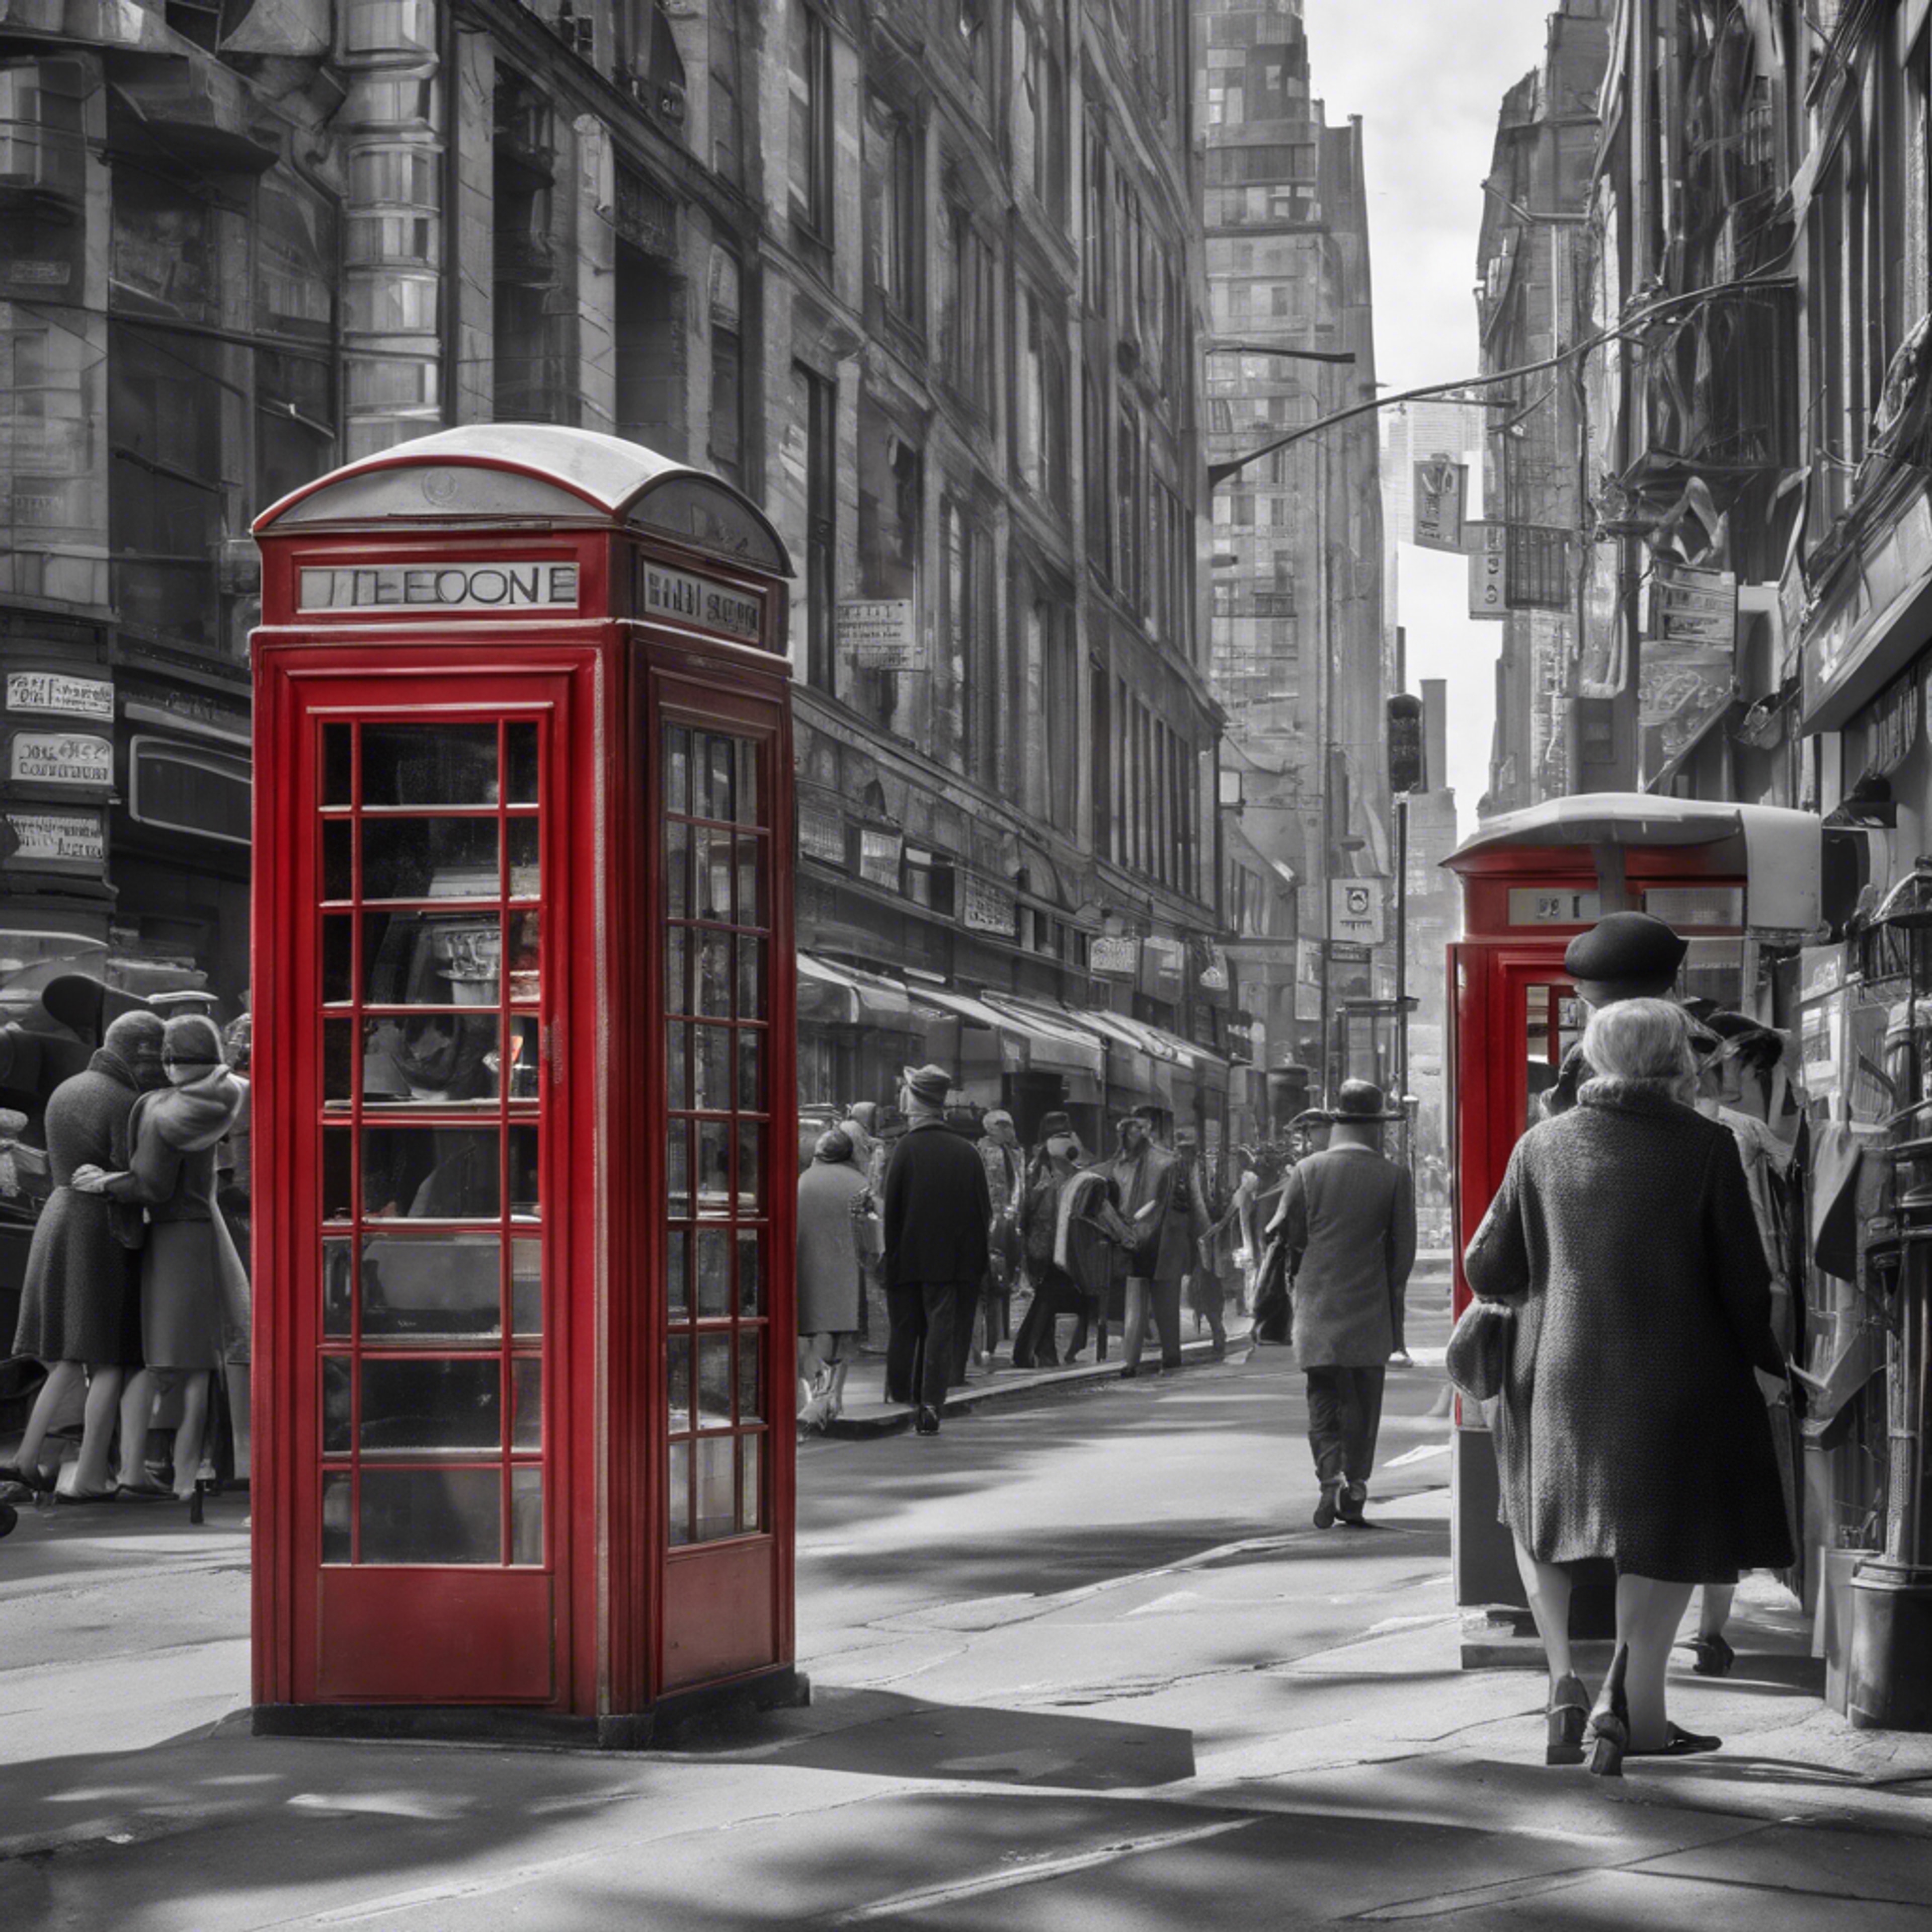 A black and white picture of a busy city street in the 1960s, with one characteristic iconic red phone booth.壁紙[8cad1b57085c4579b492]